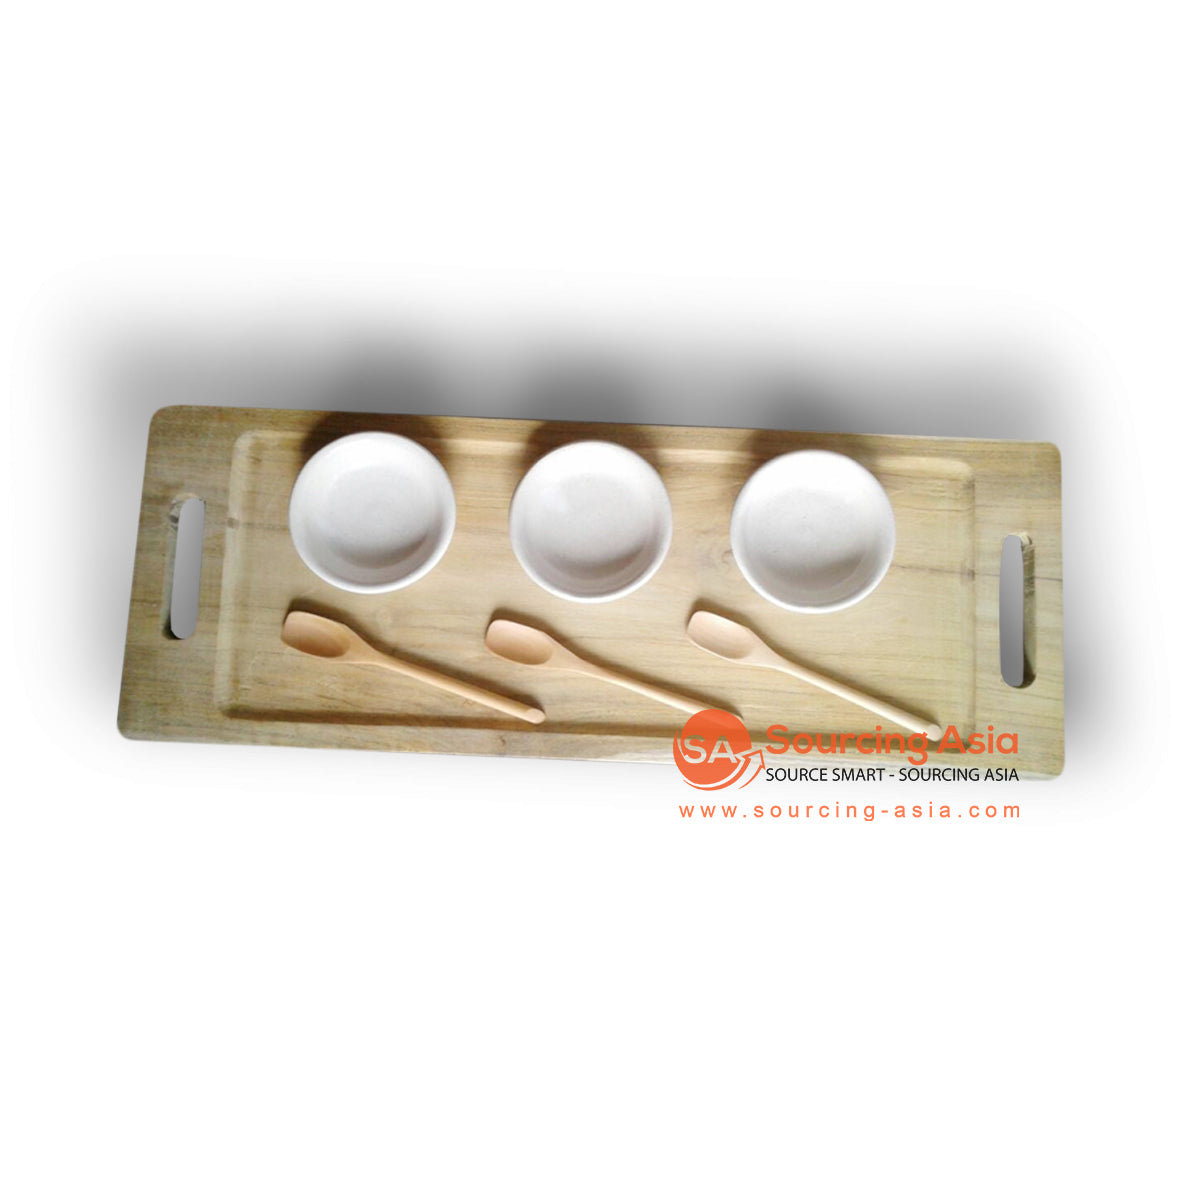 ABIAN001 NATURAL SONOKELING WOOD SPA TRAY WITH THREE BOWLS AND SPOONS